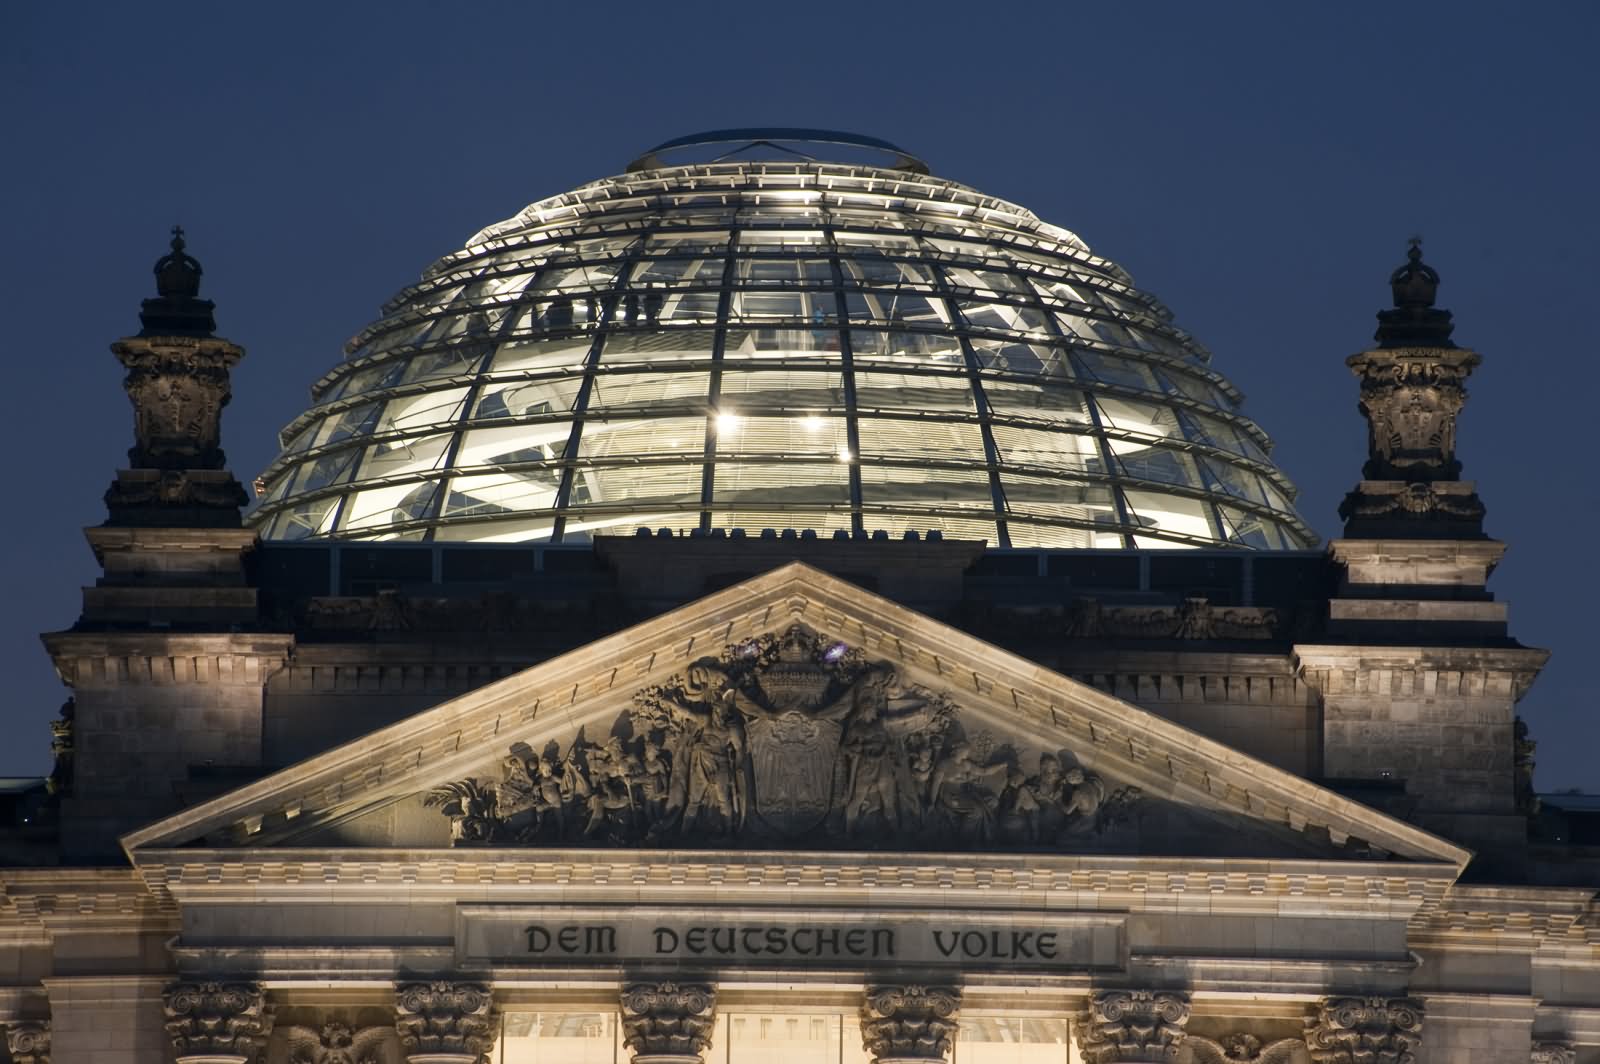 The Dome On The Top Of The Reichstag Building In Berlin At Night